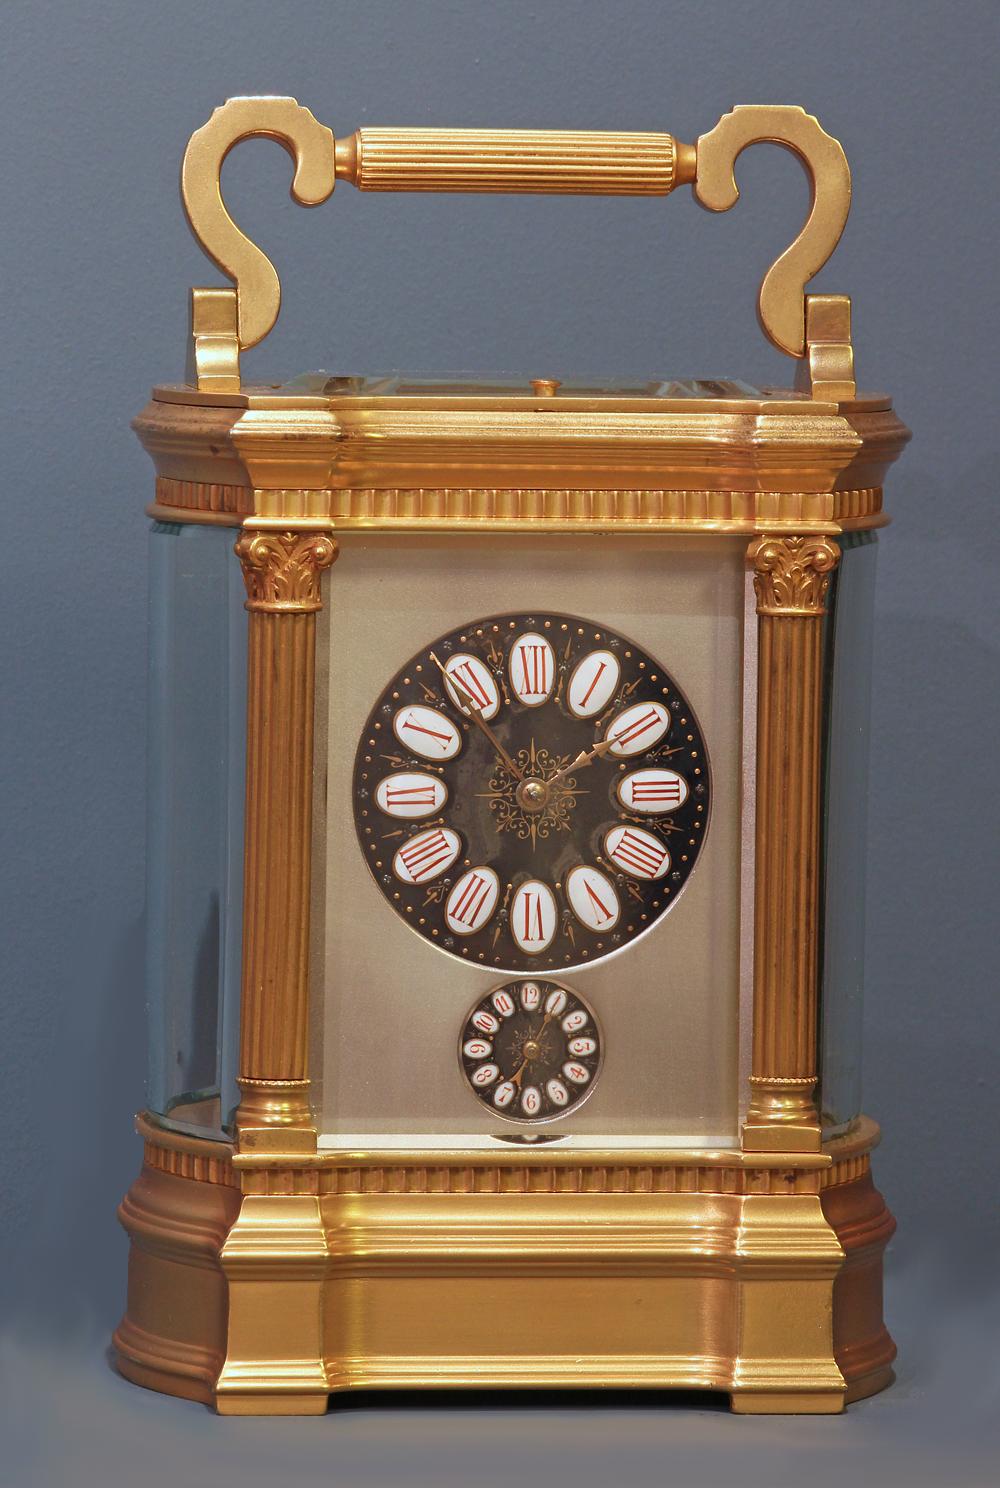 Case: 
The large gilt-bronze bow-sided Anglaise Riche case has fluted Corinthian columns to the corners, a hinged handle, beveled glasses to the sides and a shaped beveled glass above.

Dial: 
The Limoges enamel dials have red Roman numerals on